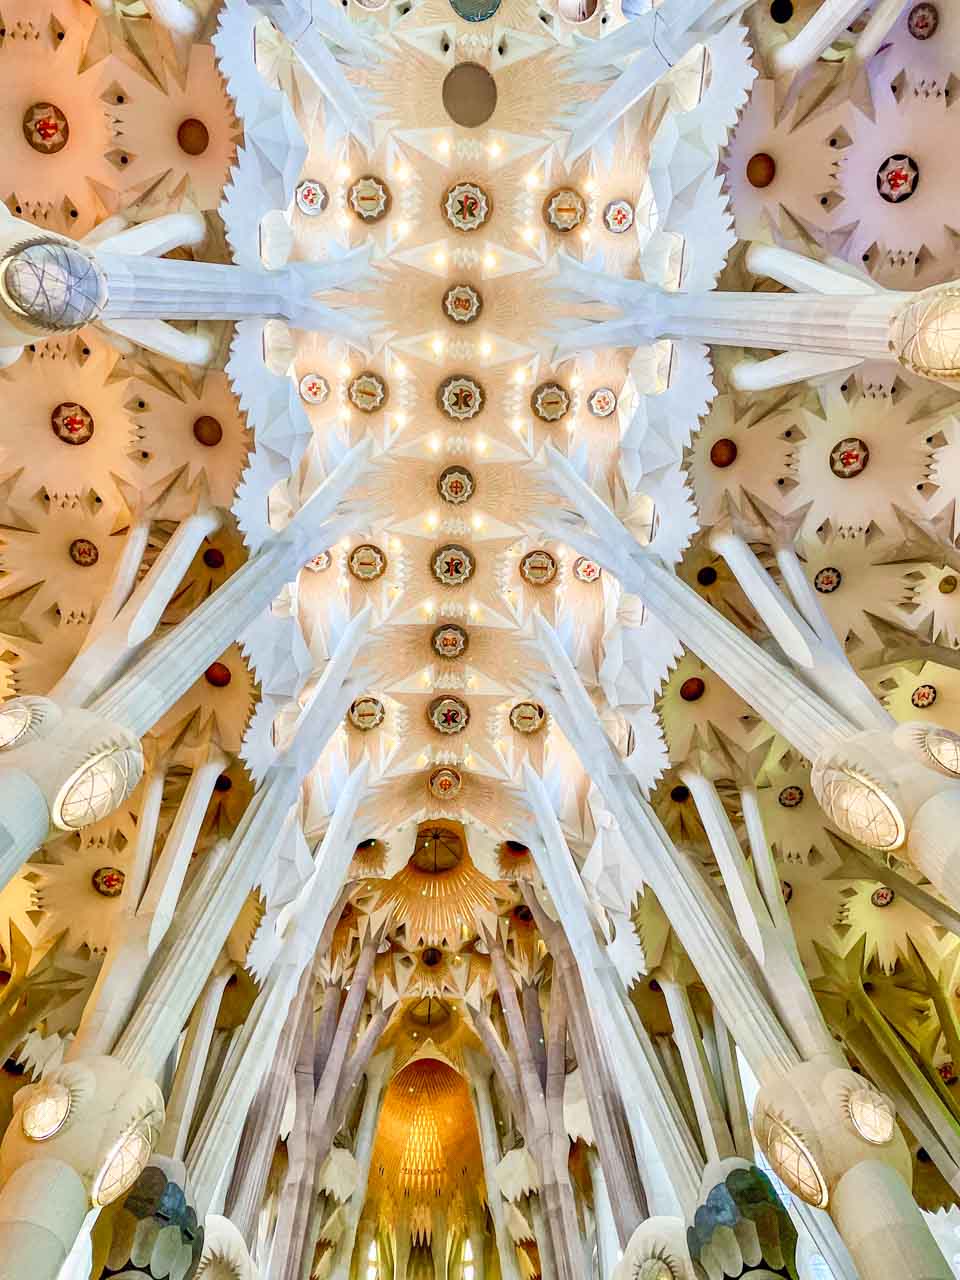 I don't know how to describe this ceing in Sagrada Familia except to say it is over-the-top.